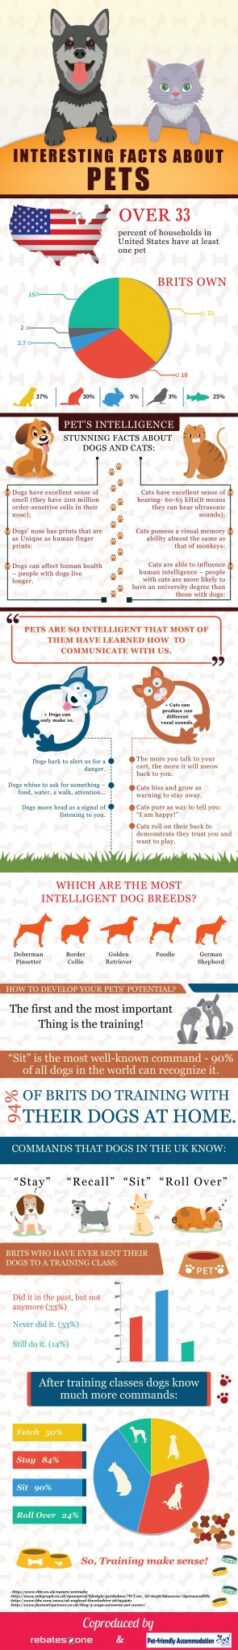 Interesting Facts About Pets